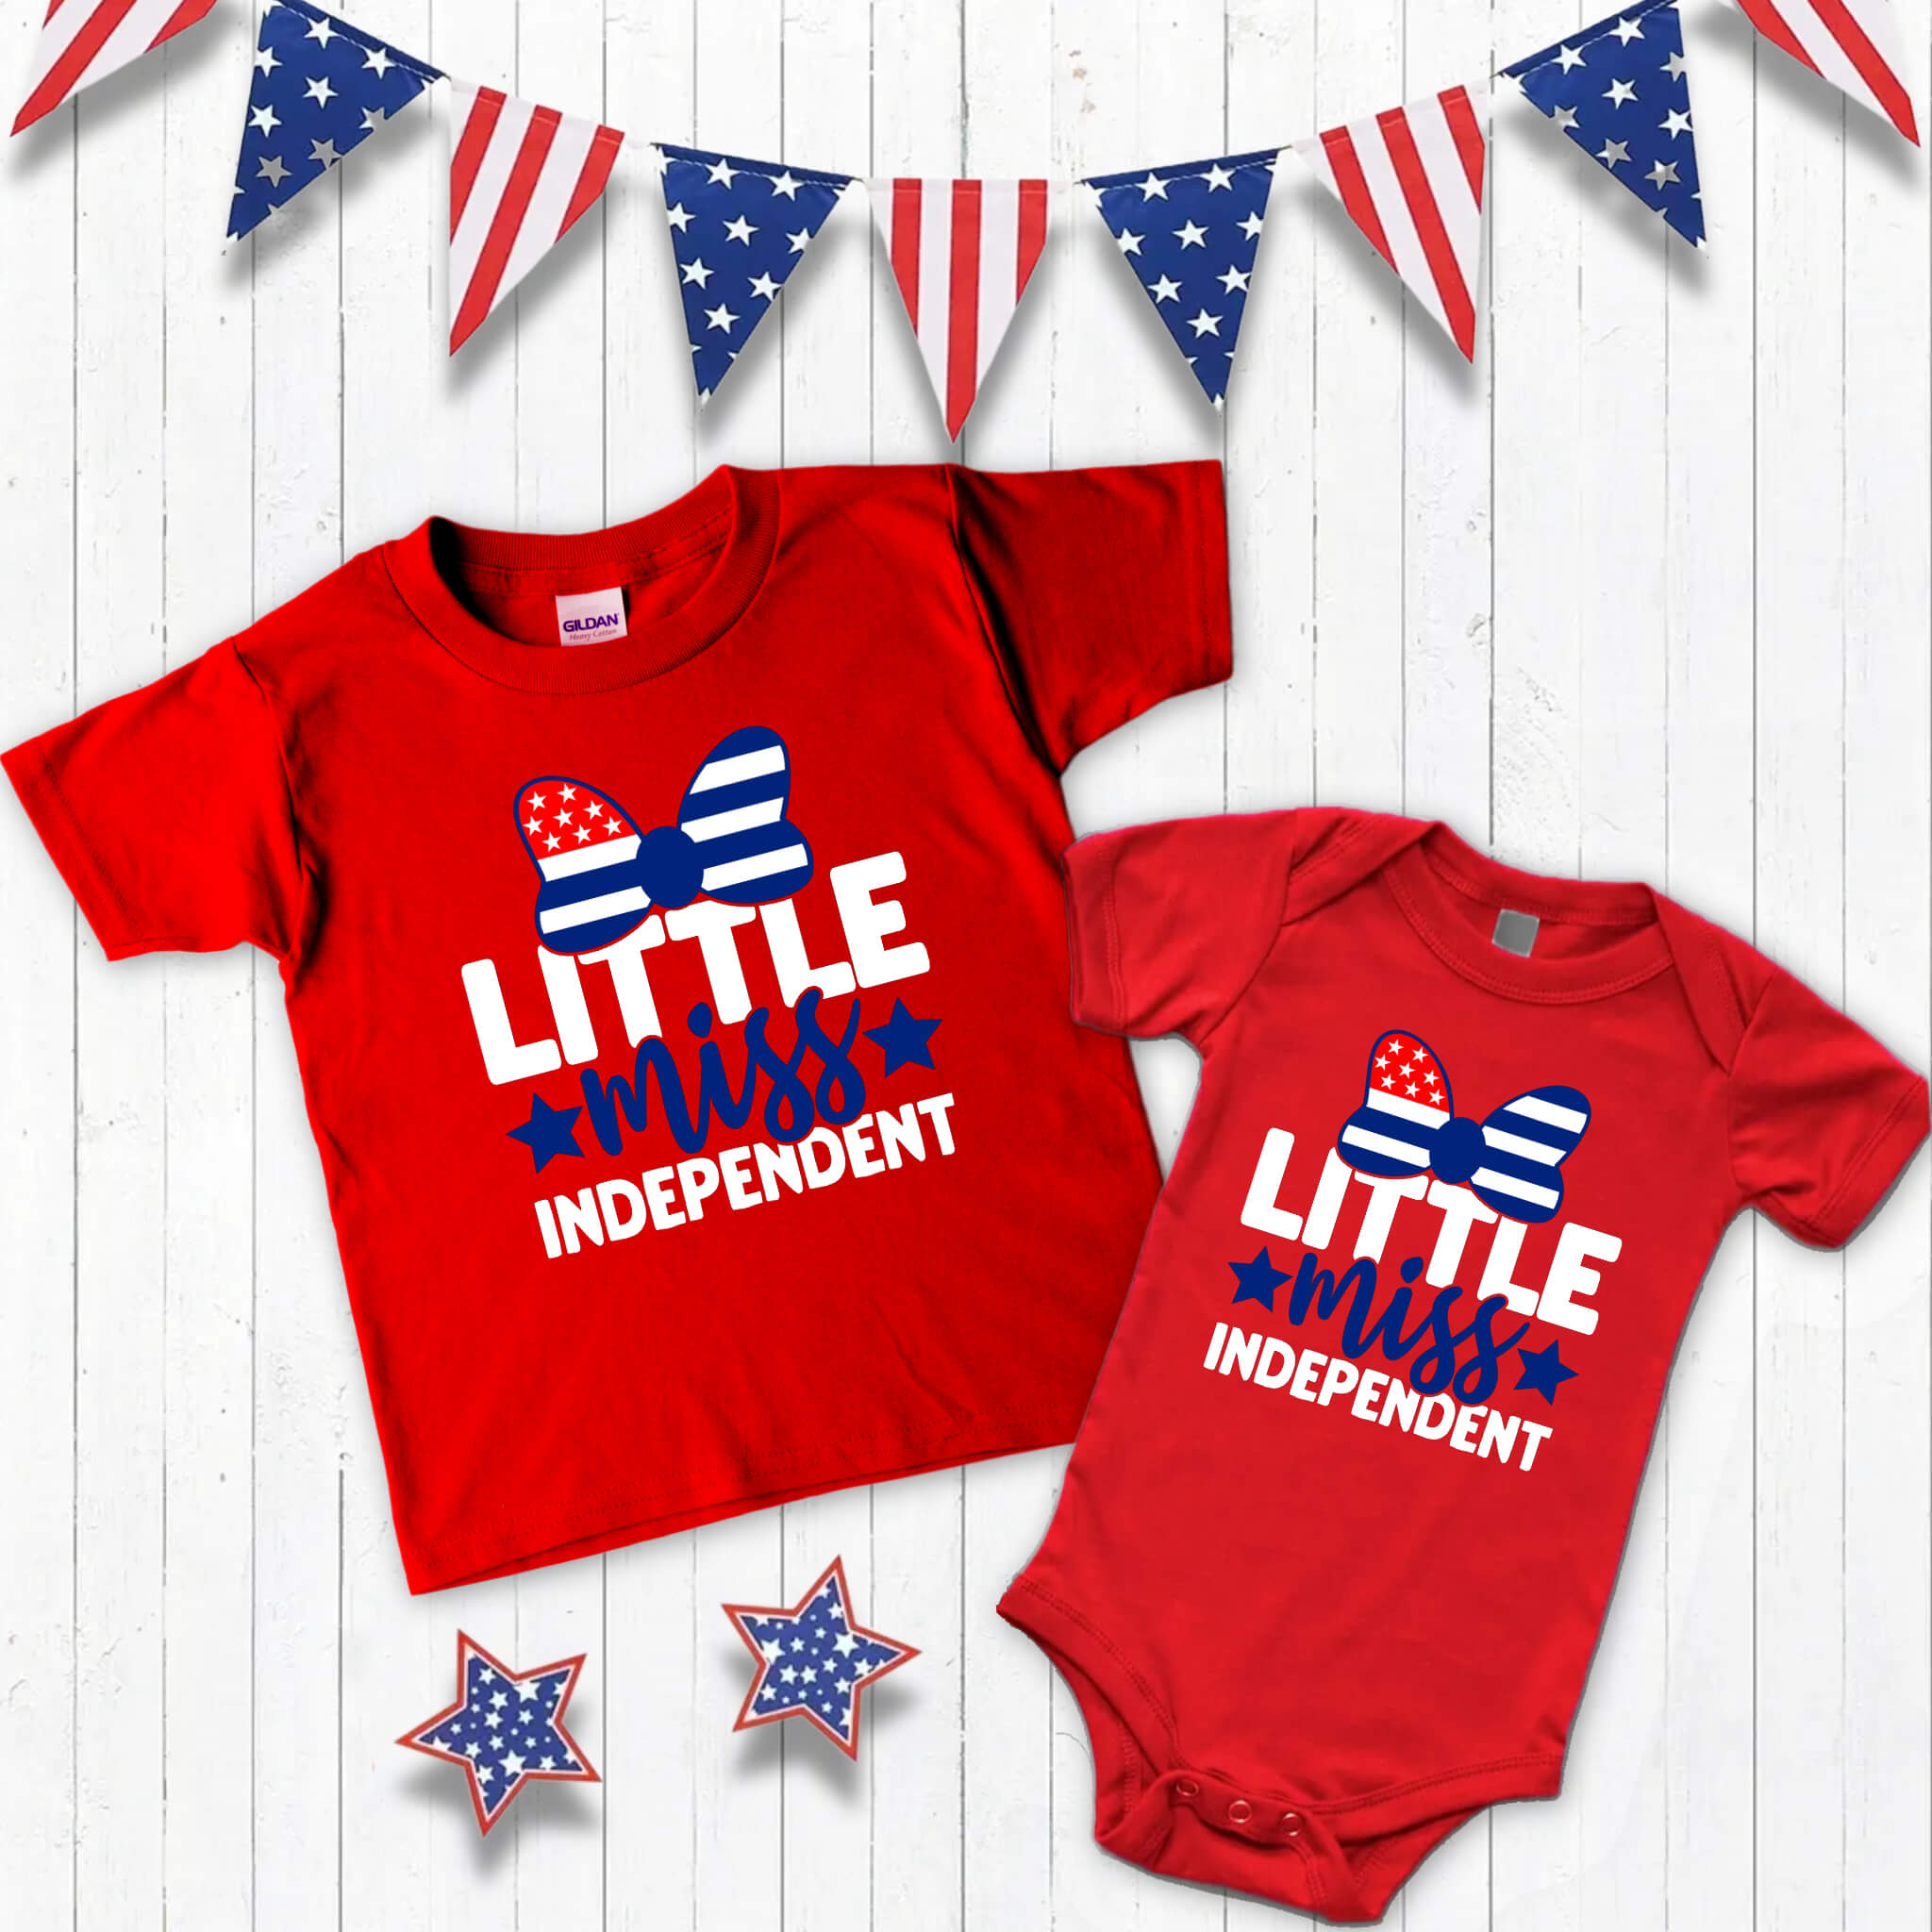 4th of July - Little Miss Independent Patriotic Girl’s Graphic Print Onesie / T-Shirt